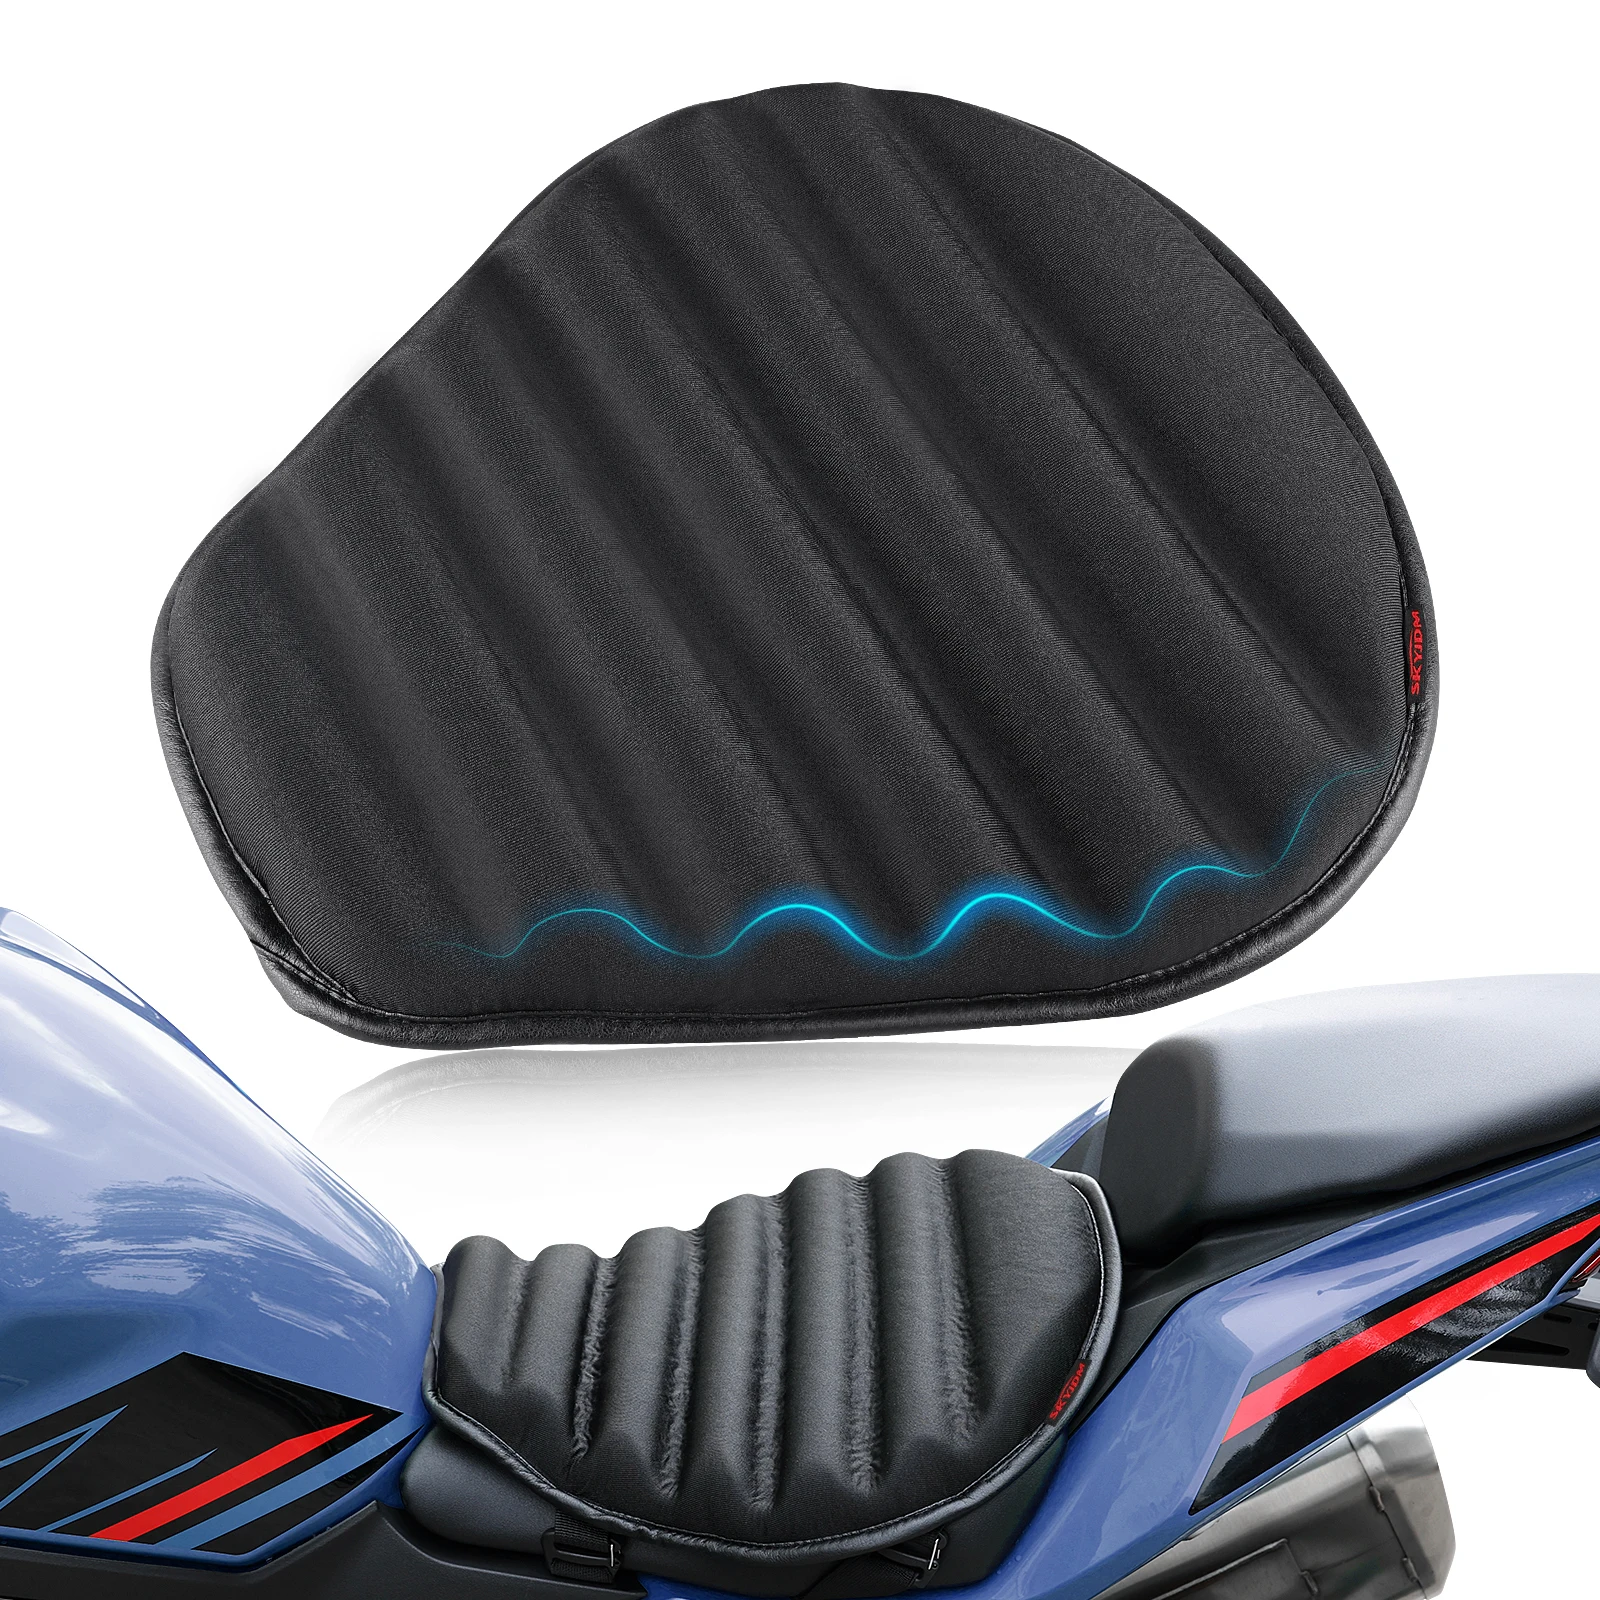 

NEW Wavy Motorcycle Seat Pad Black 3D Honeycomb Structure Shock& Breathable Motorcycle TPE Seat Cushion for Long Rides Anti-slip